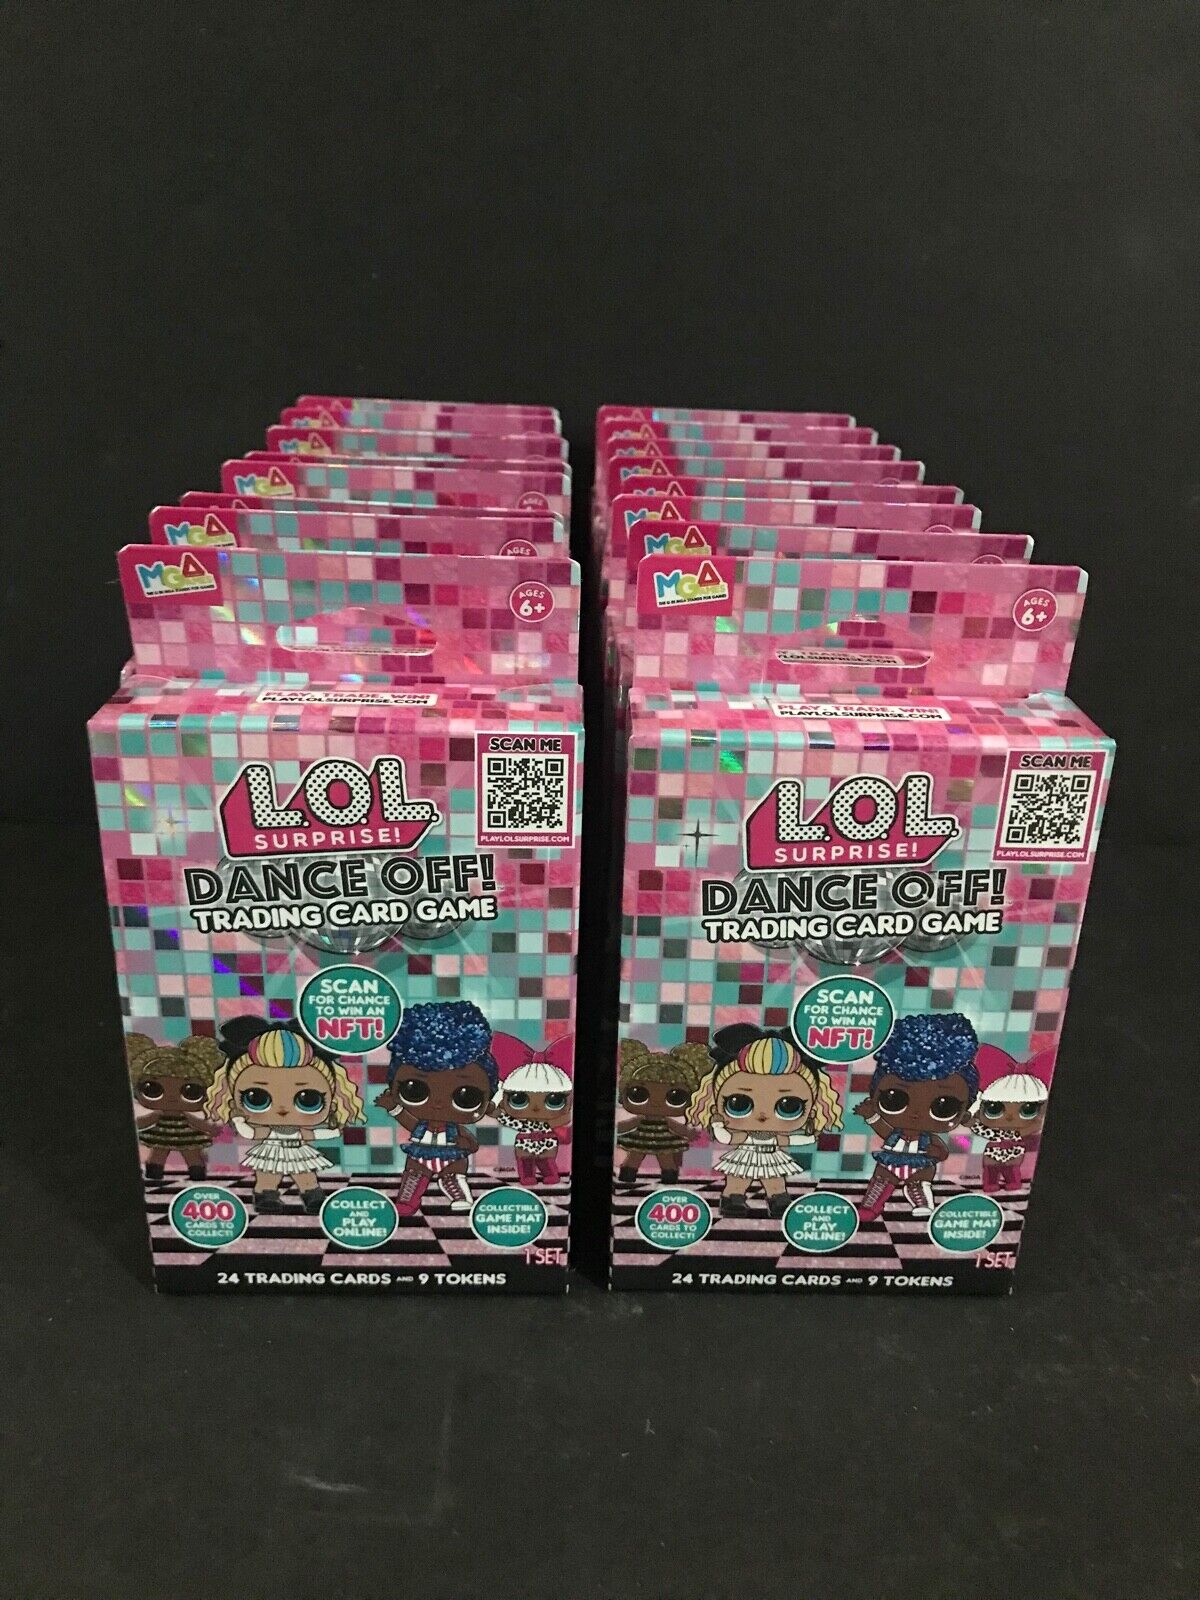 L.O.L Surprise Dance Off! Trading Card Game Qty 16 Starter Packs- NEW